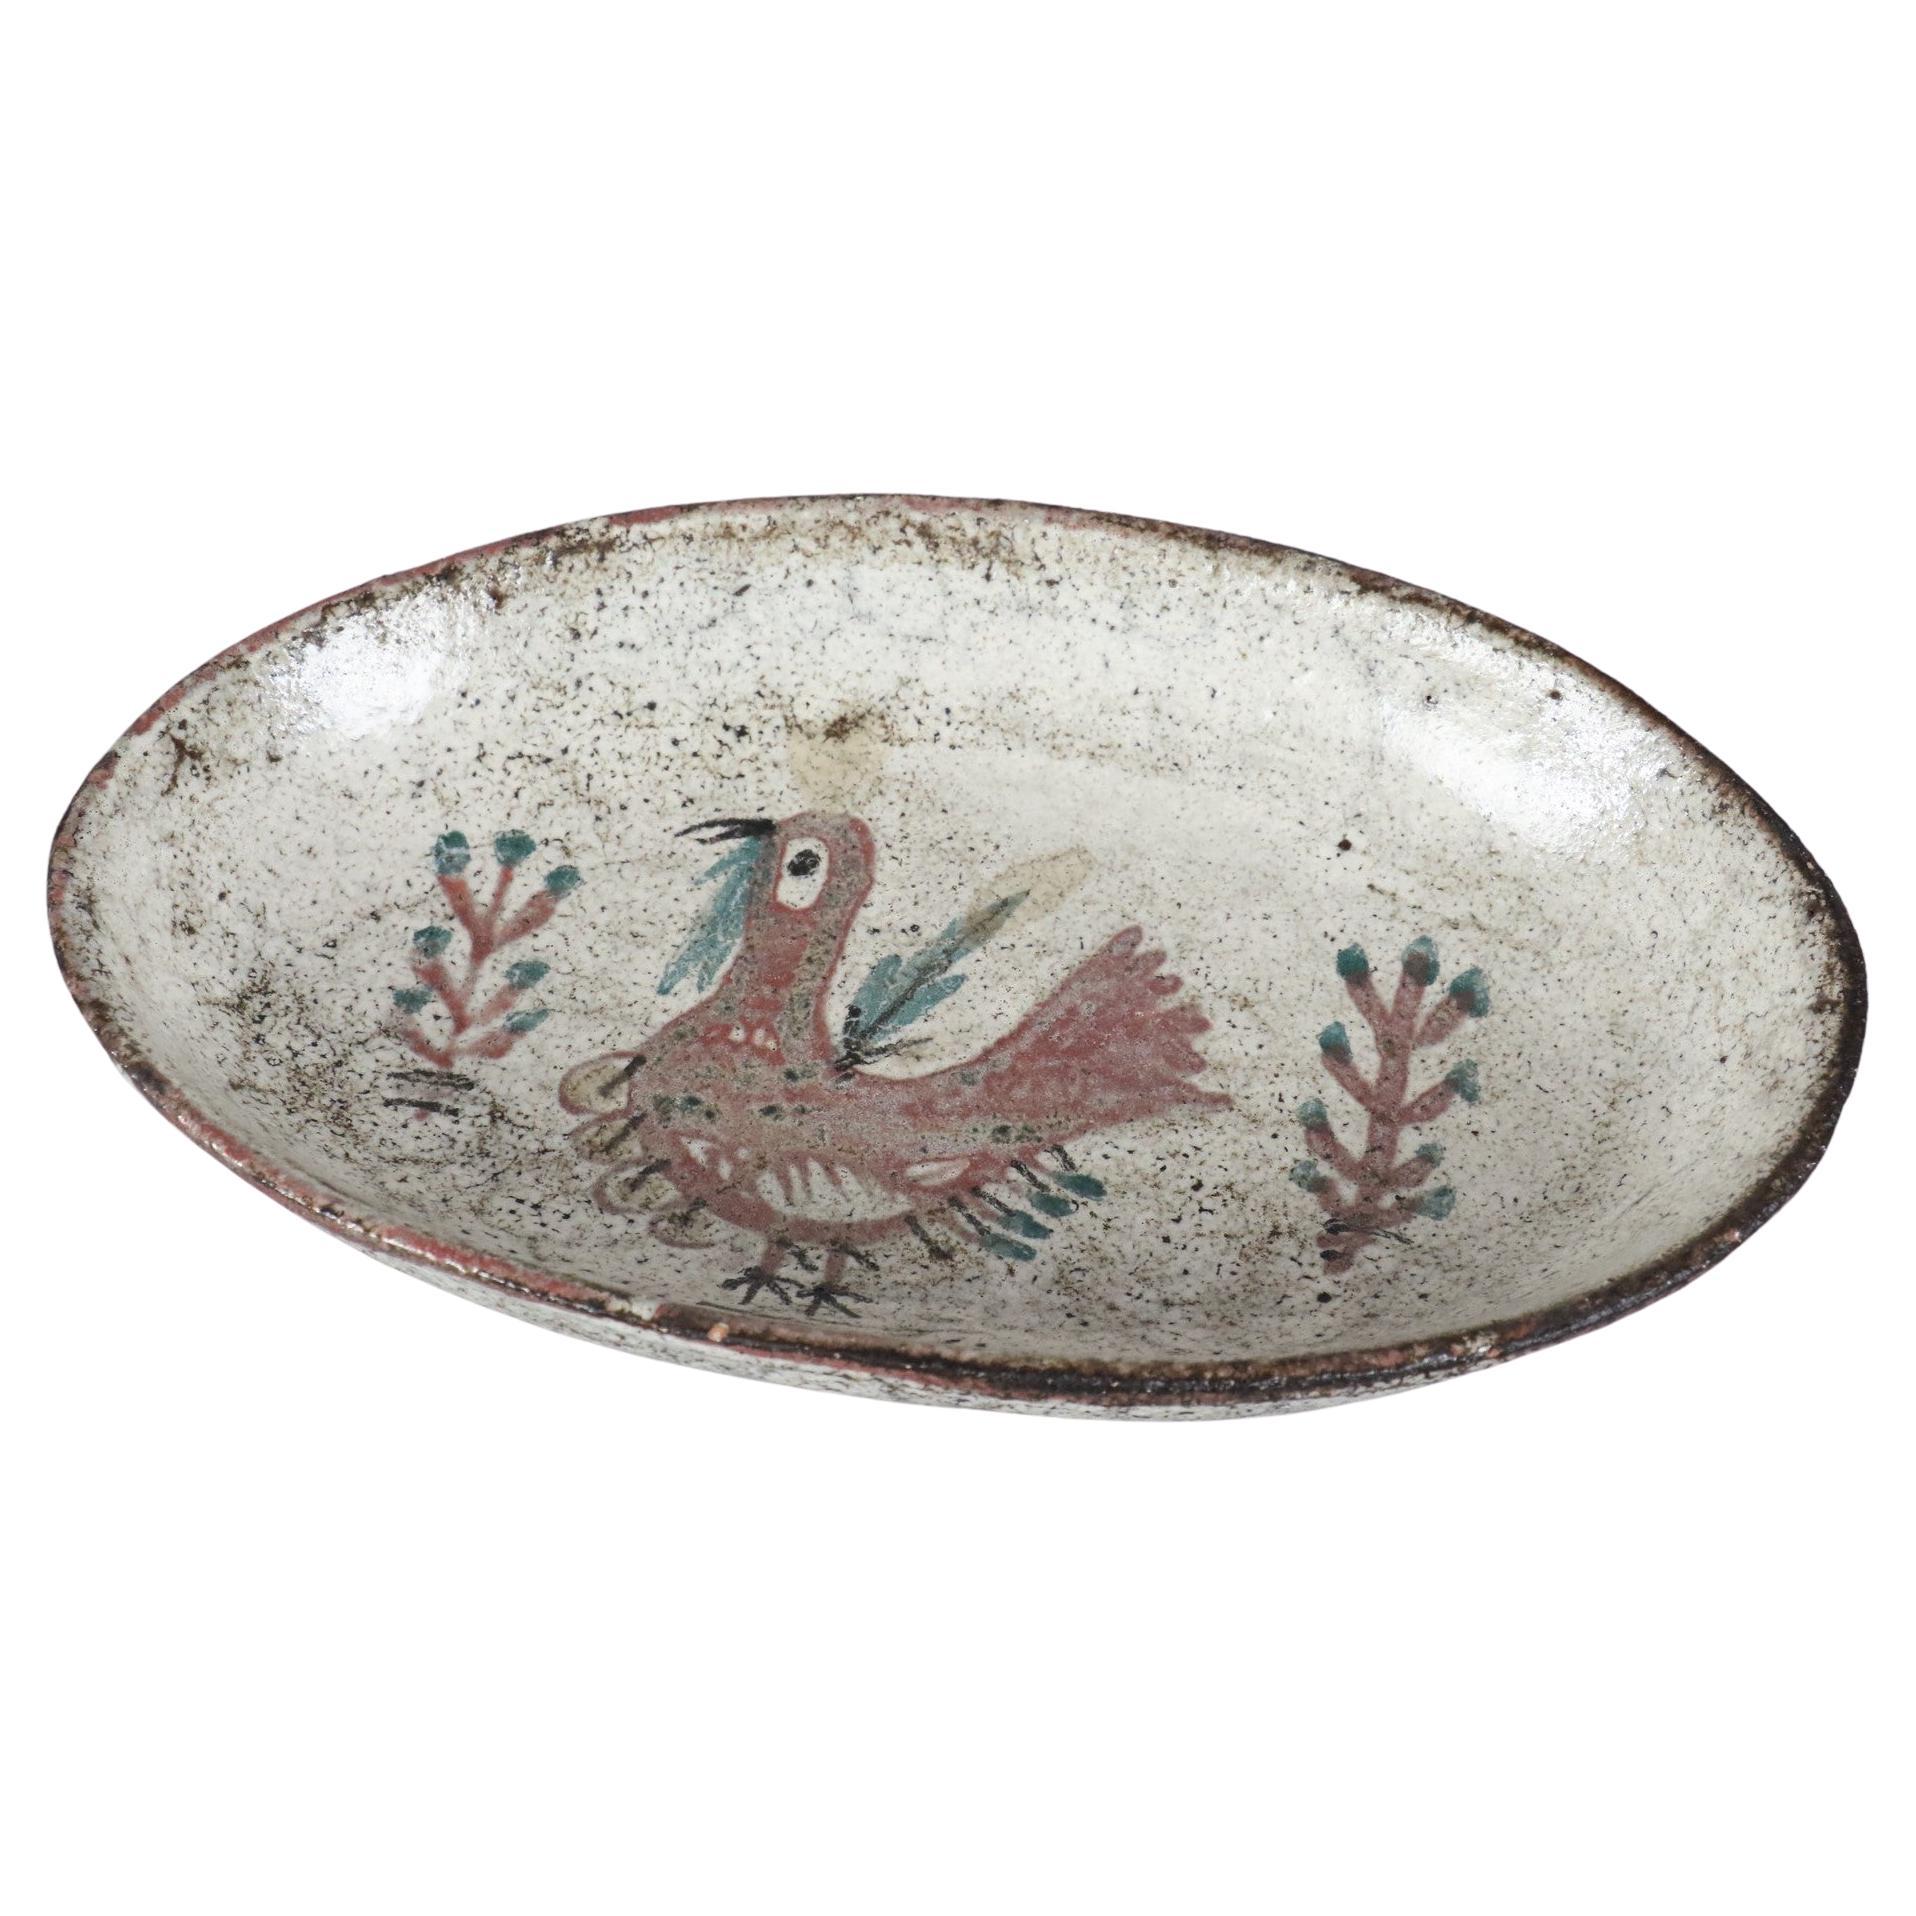 Gustave Reynaud, Le Murier Studio Pottery, Mid-Century ceramic, Vallauris, 1960s

Very nice decorative ceramic tray decorated with a red rooster. This piece is characteristic of Gustave Reynaud's work by its shape, the choice of the decorative